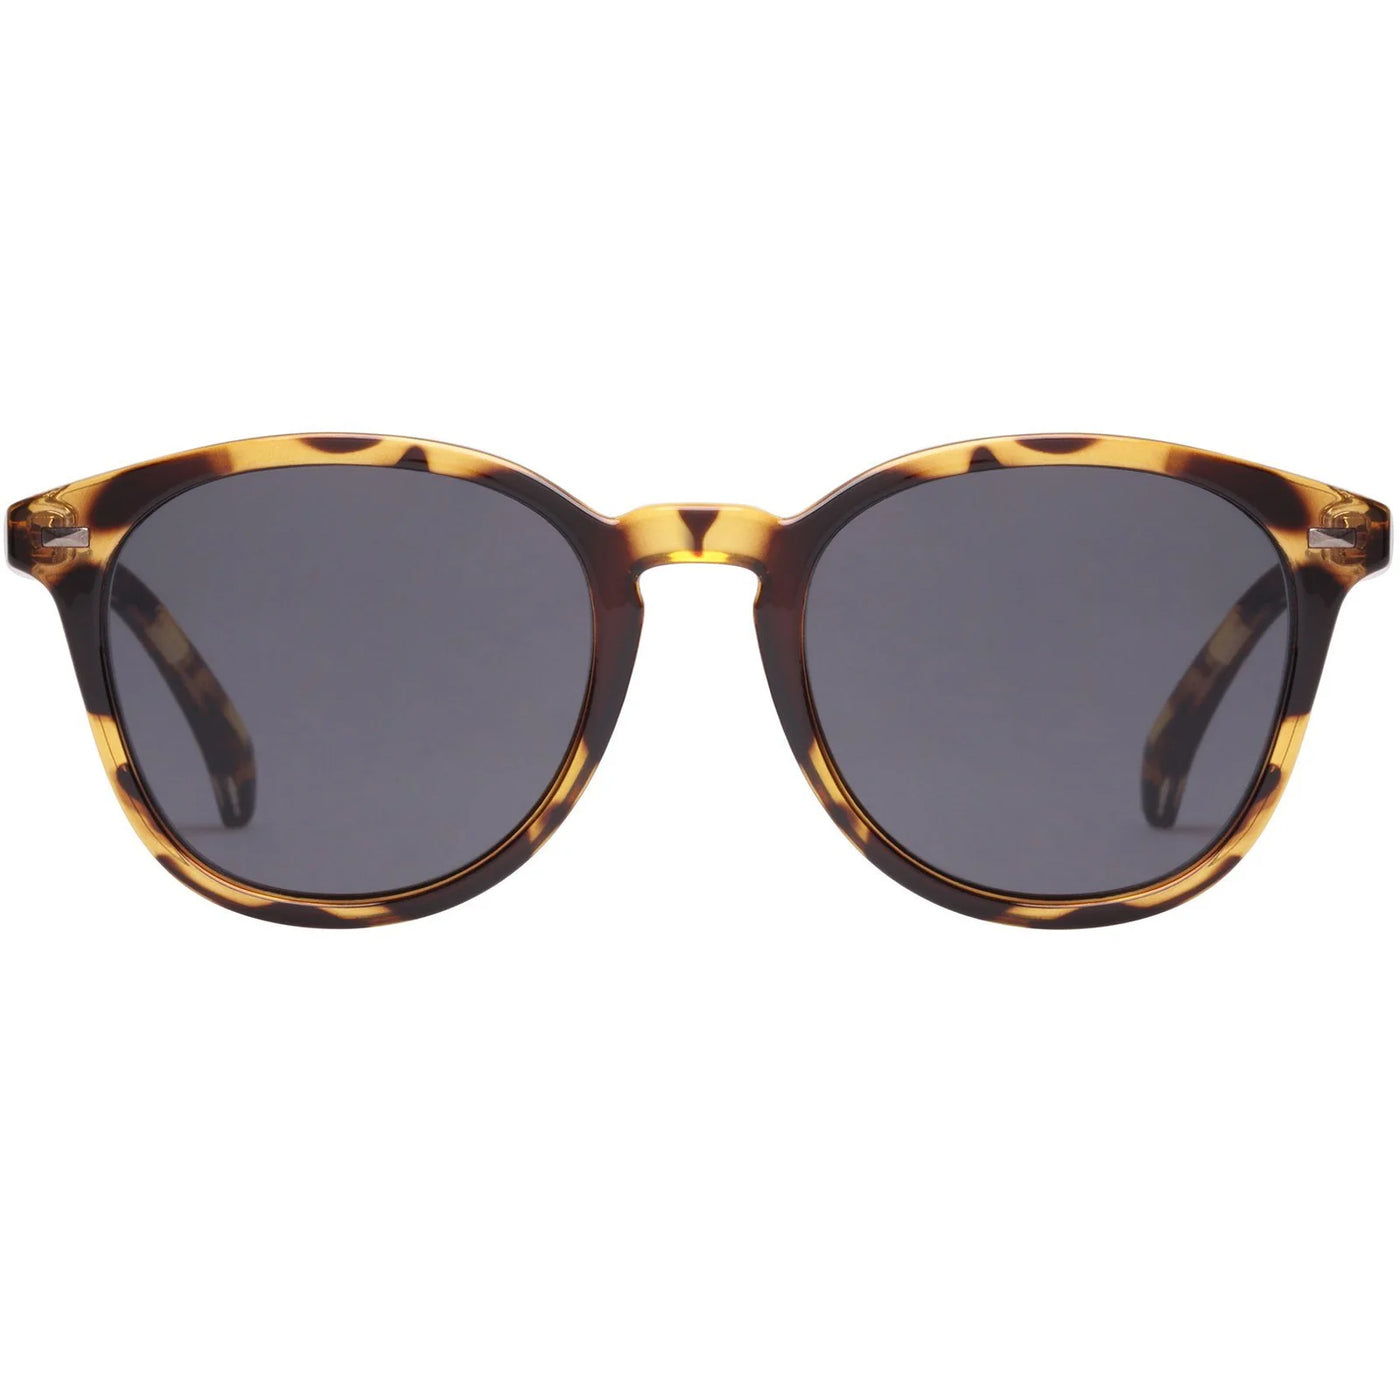 Bandwagon Sunglasses in Syrup Tort - Madison's Niche 